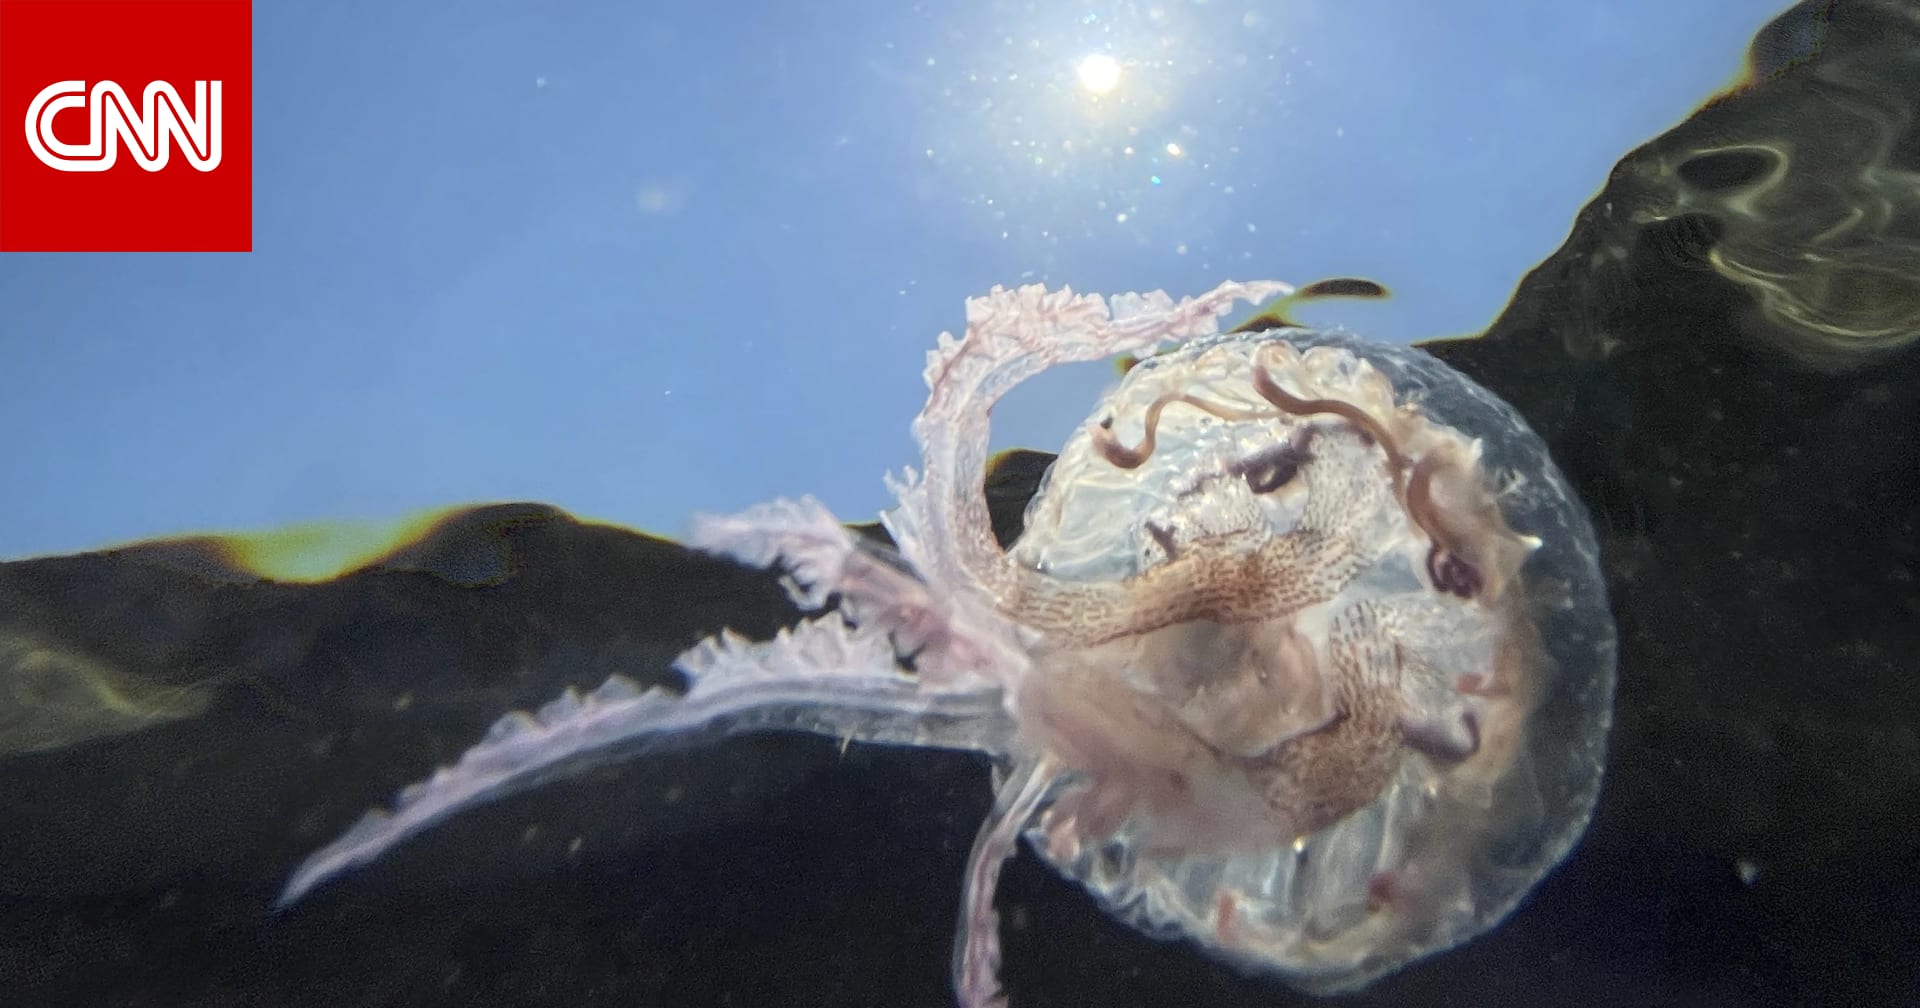 A diver sends a jellyfish to another “dimension” on an action-packed journey